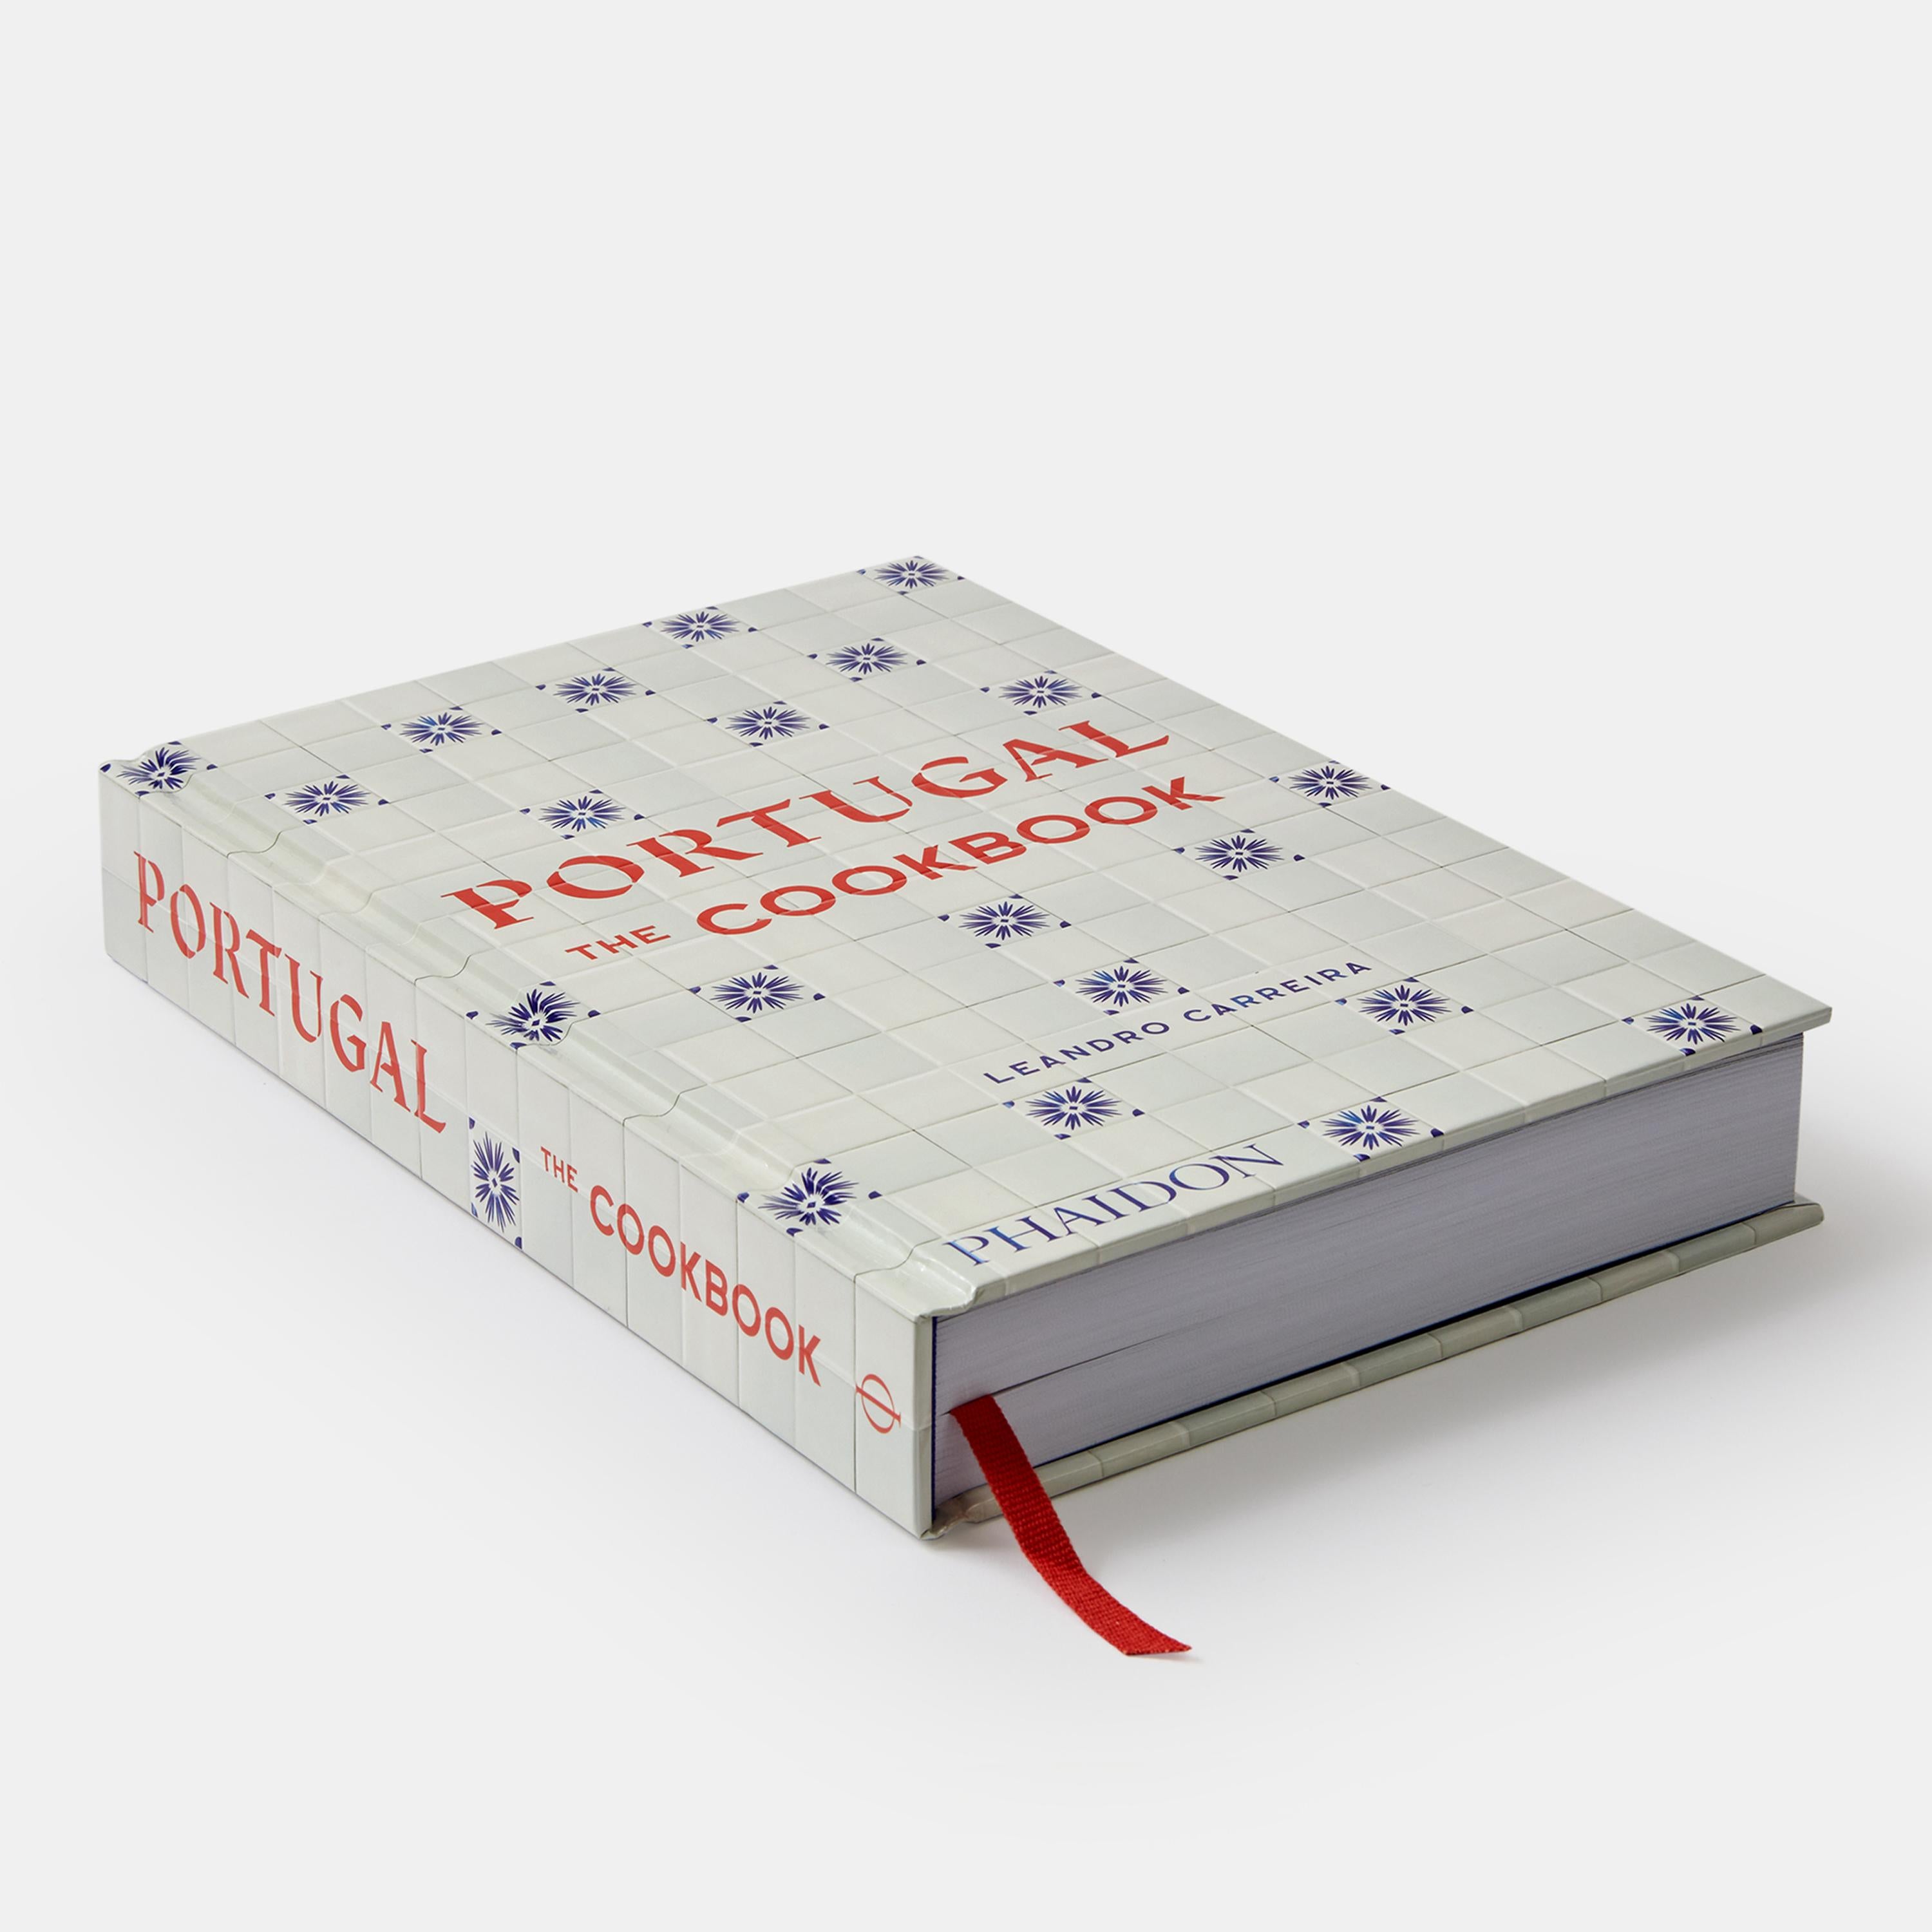 Contemporary Portugal: The Cookbook For Sale